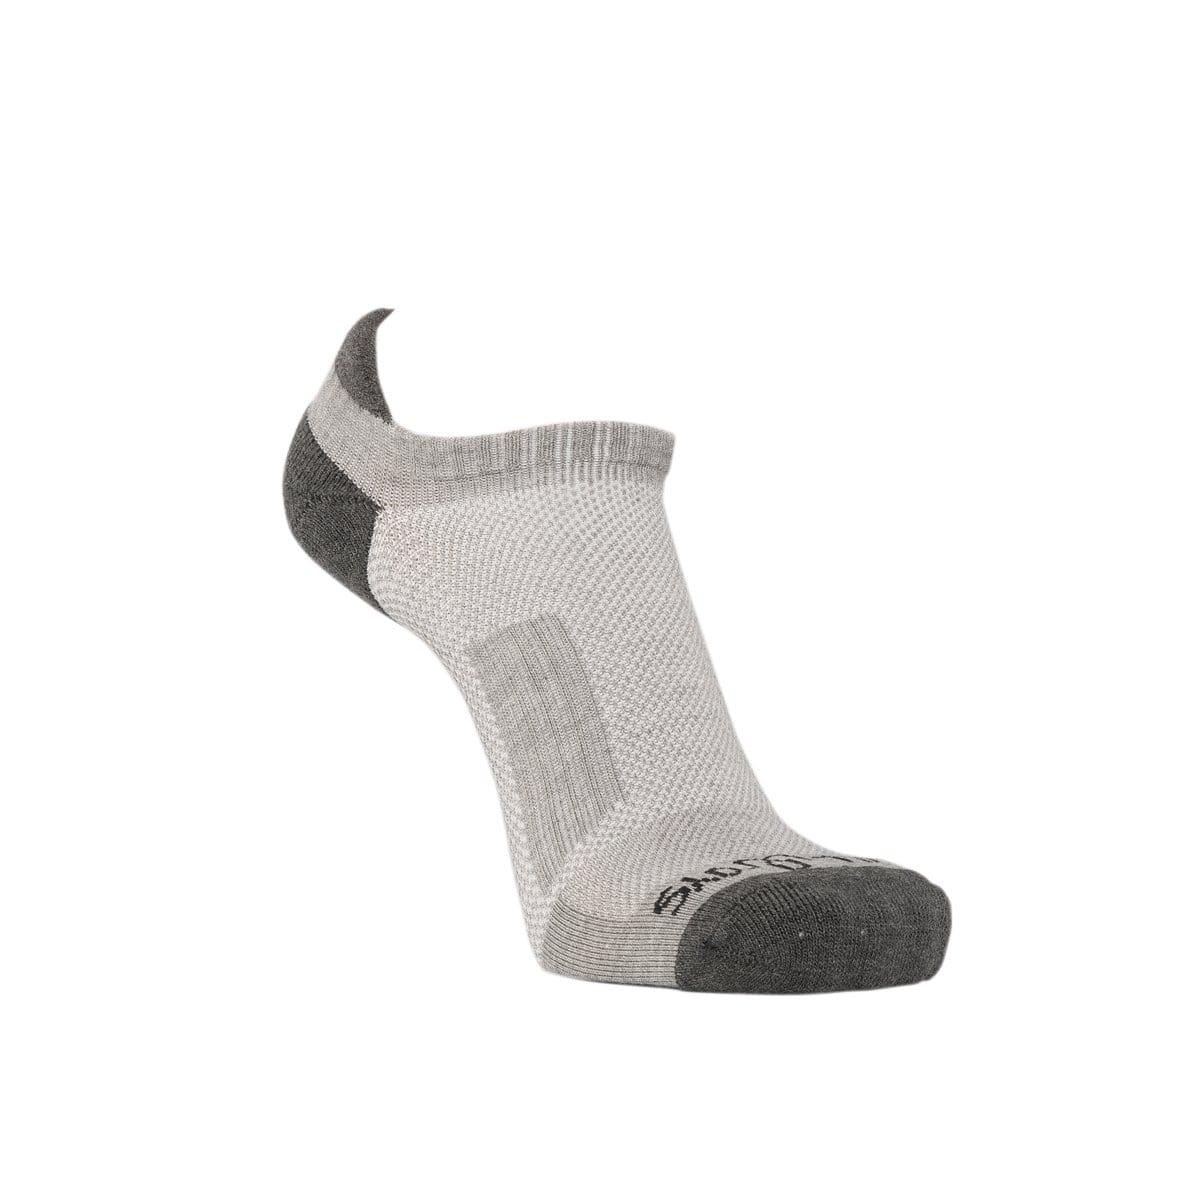 Chill Boys Bamboo Ankle Socks - Moisture Wicking Bamboo Socks - front angle view